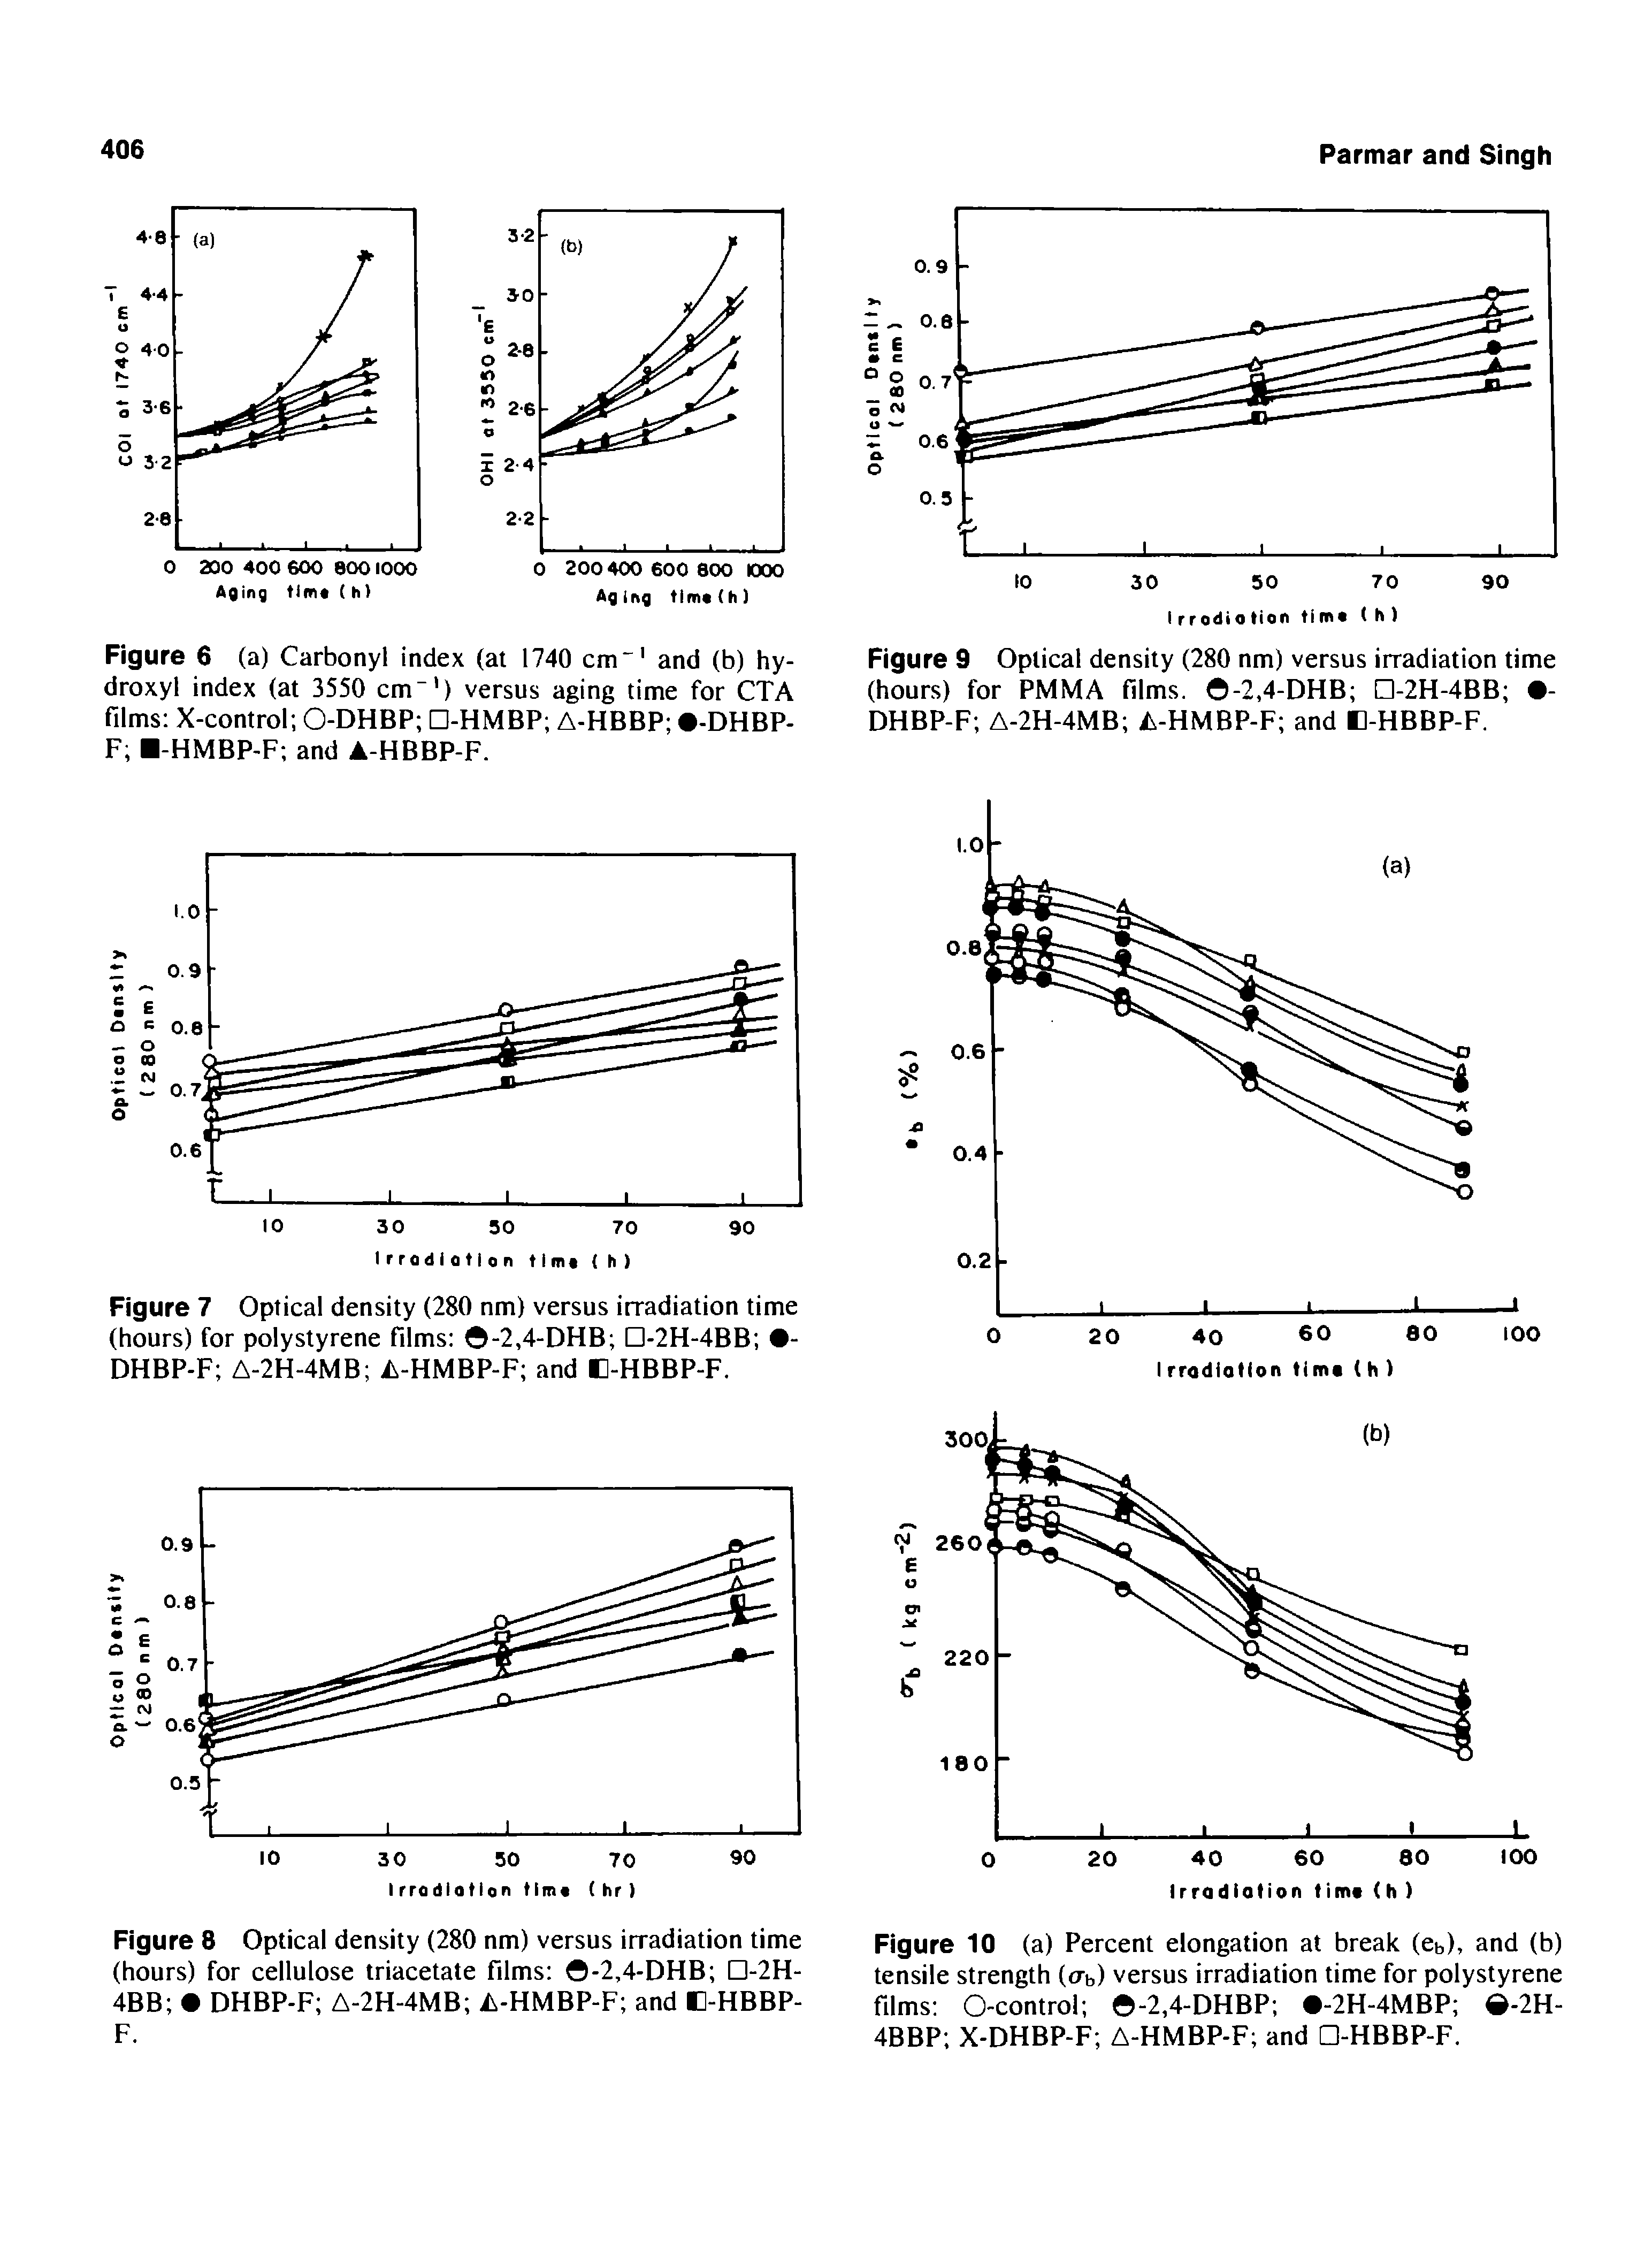 Figure 7 Optical density (280 nm) versus irradiation time (hours) for polystyrene films -2,4-DHB -2H-4BB -DHBP-F A-2H-4MB A-HMBP-F and B-HBBP-F.